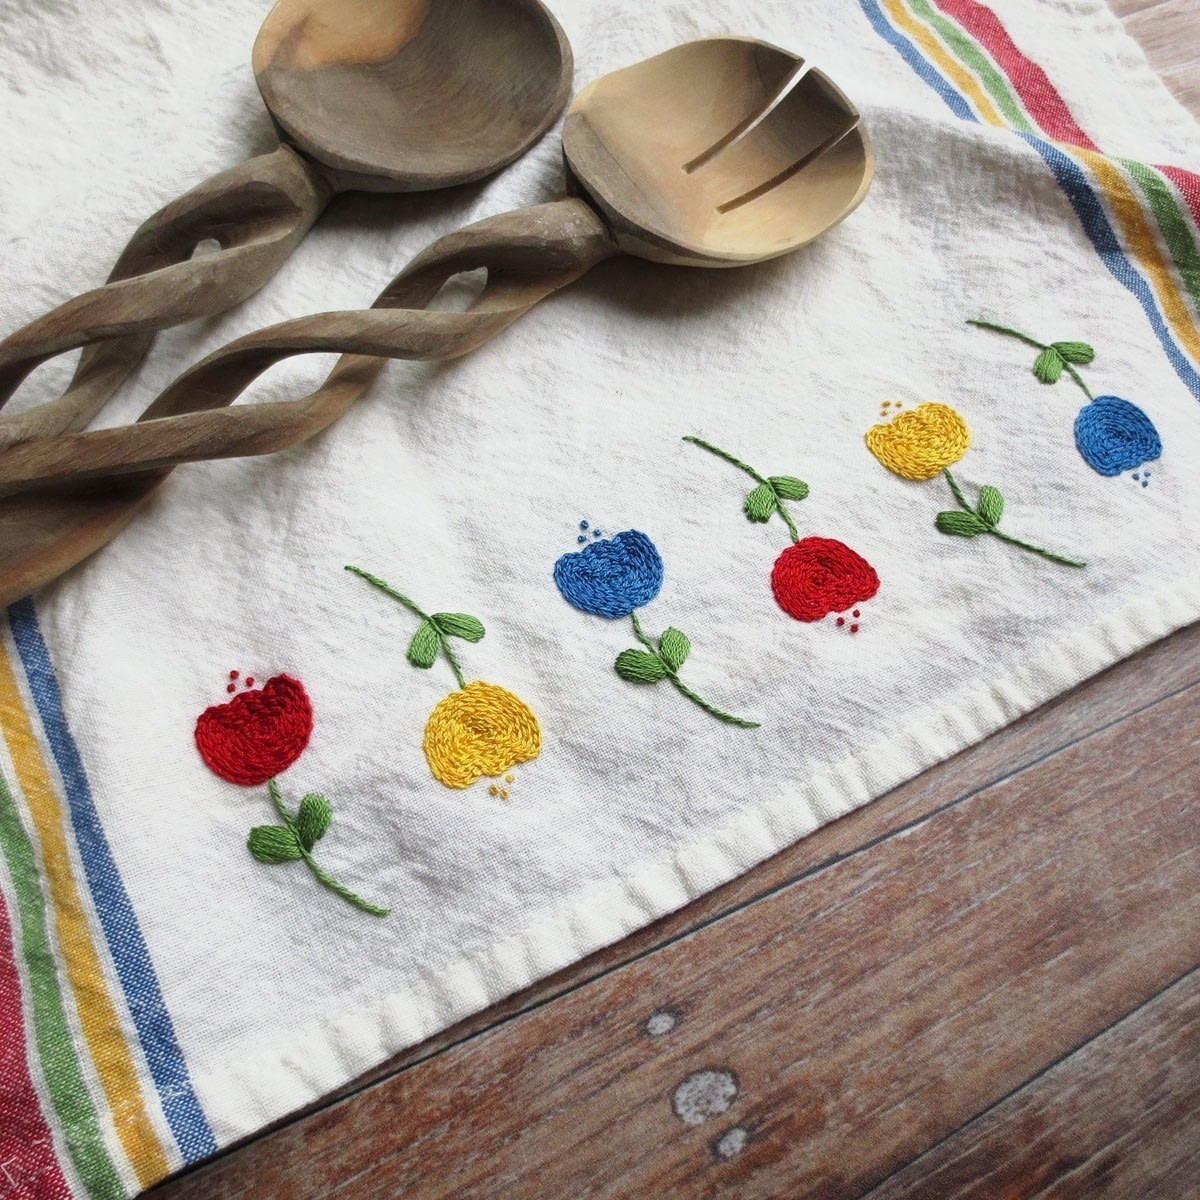 Free Hand Embroidery Patterns For Tea Towels Embroidered Tulip Tea Towel How To Make A Tea Towel Needlework